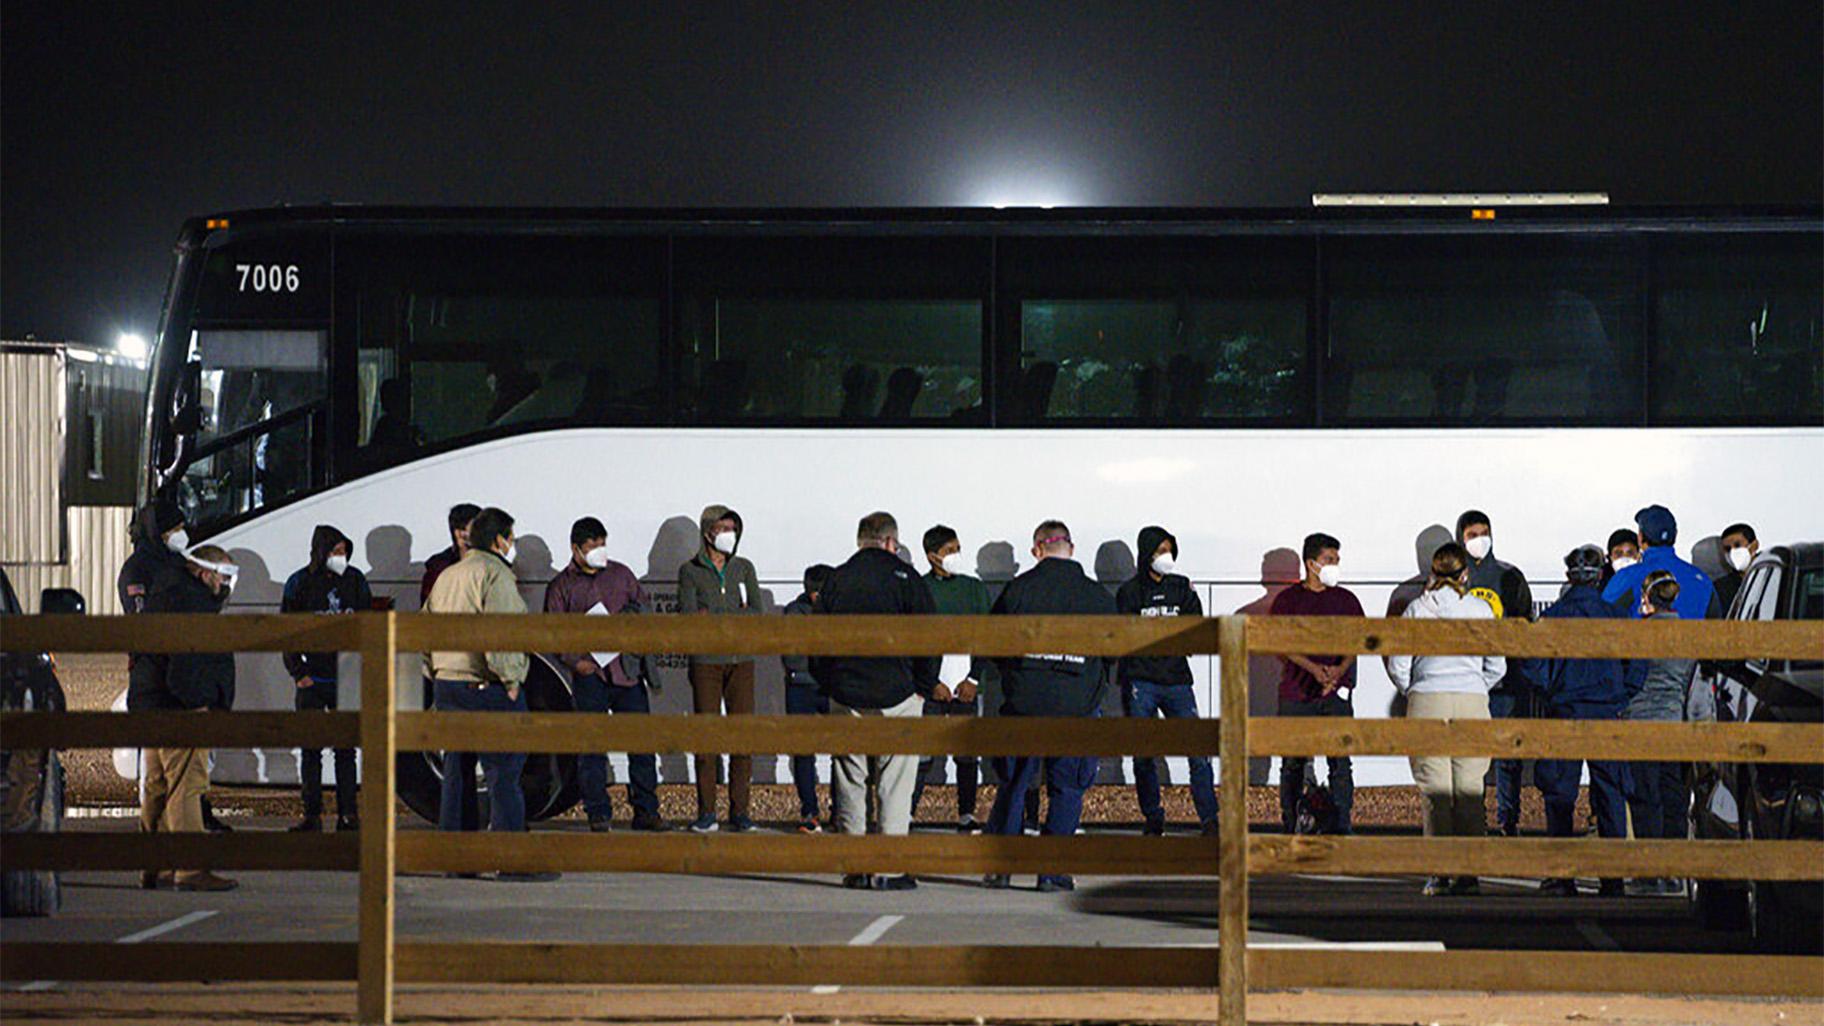 The Biden administration is not requiring FBI fingerprint background checks of caregivers at its rapidly expanding network of emergency sites to hold thousands of immigrant teenagers. In this Sunday, March 14, 2021, file photo, migrant children and teenagers are processed after entering the site of a temporary holding facility south of Midland, Texas. (Eli Hartman / Odessa American via AP, File)